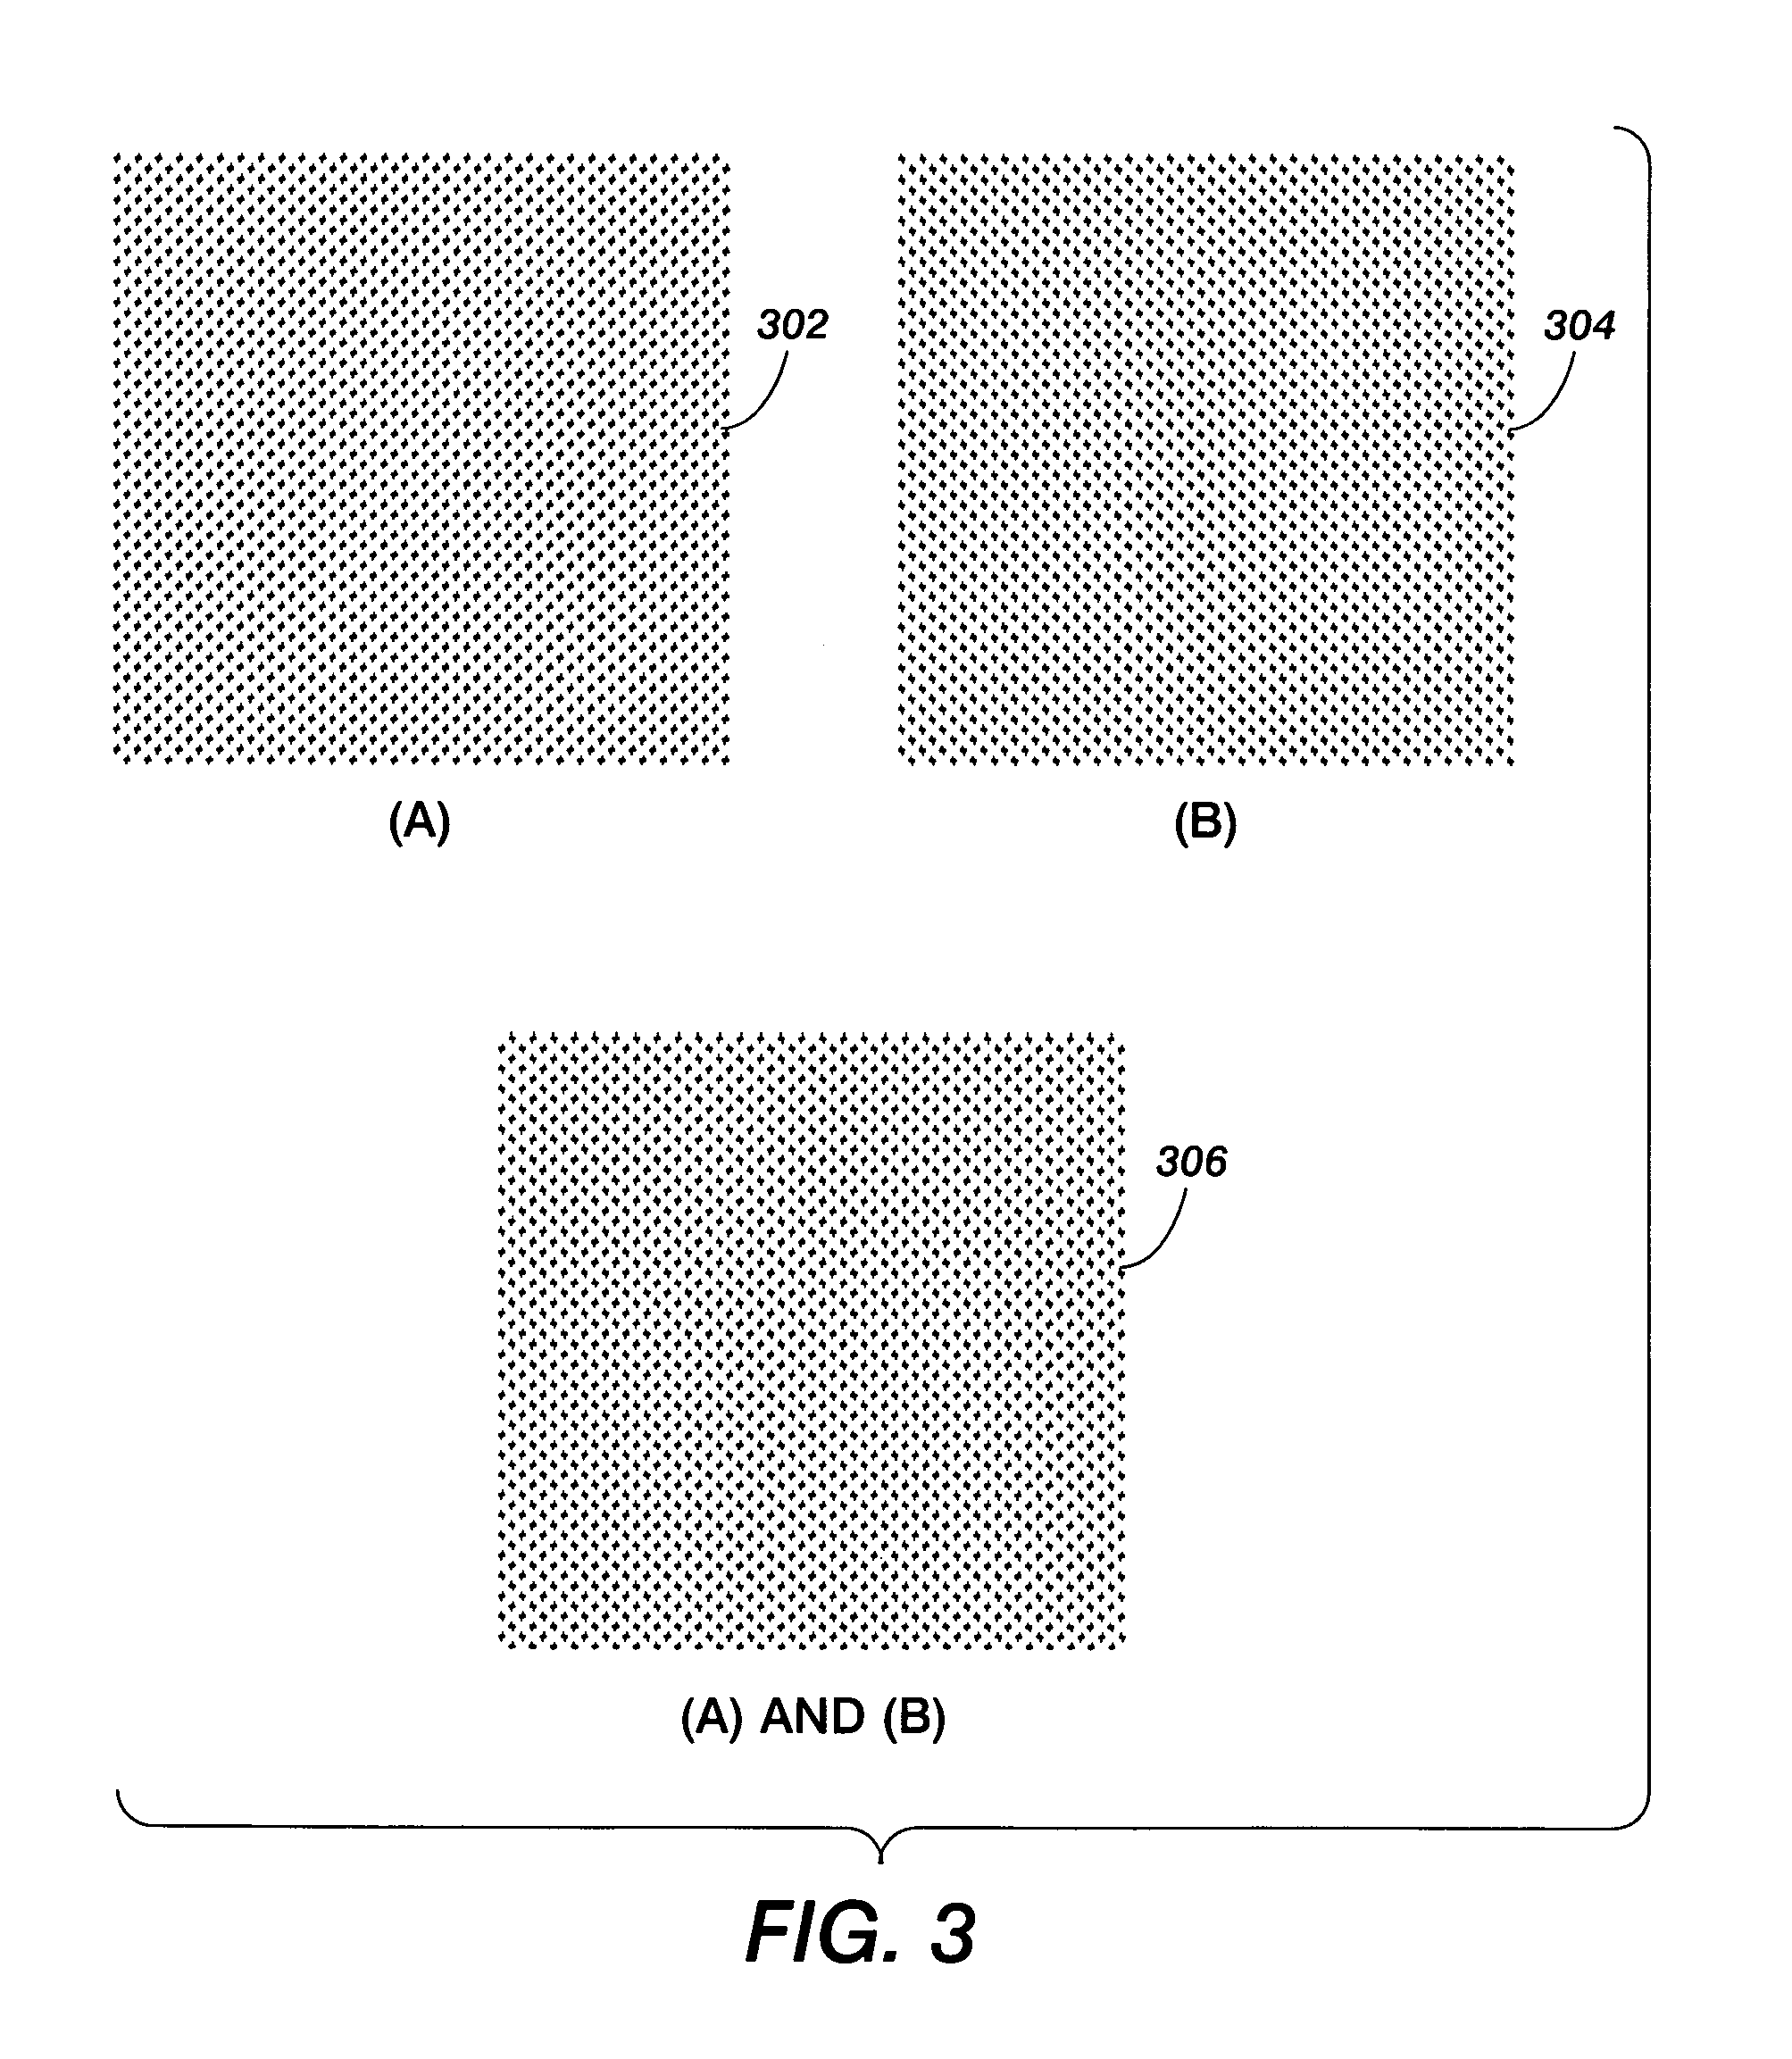 Conjugate cluster screens for embedding digital watermarks into printed halftone documents